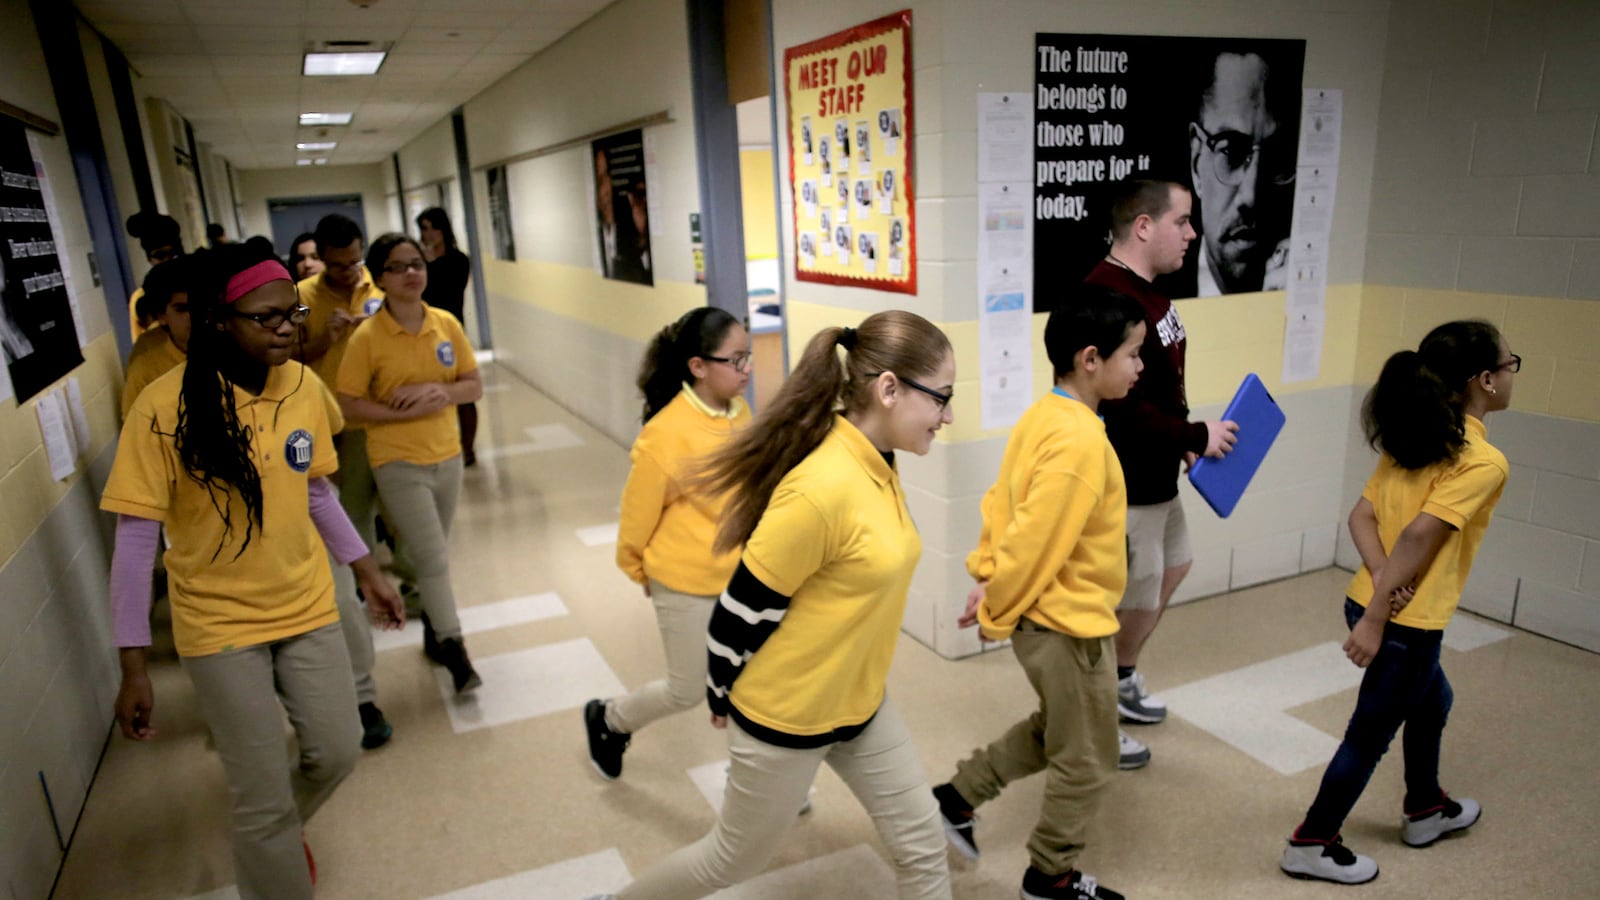 Students transition to gym class from Zoe Pierce's sixth grade science class at the Impact School in Springfield, Massachusetts in January 2017. Working with state officials, Springfield education leaders have crafted a first-of-its-kind plan for a Massachusetts school system, spinning off the middle schools into what effectively is their own miniature school system.